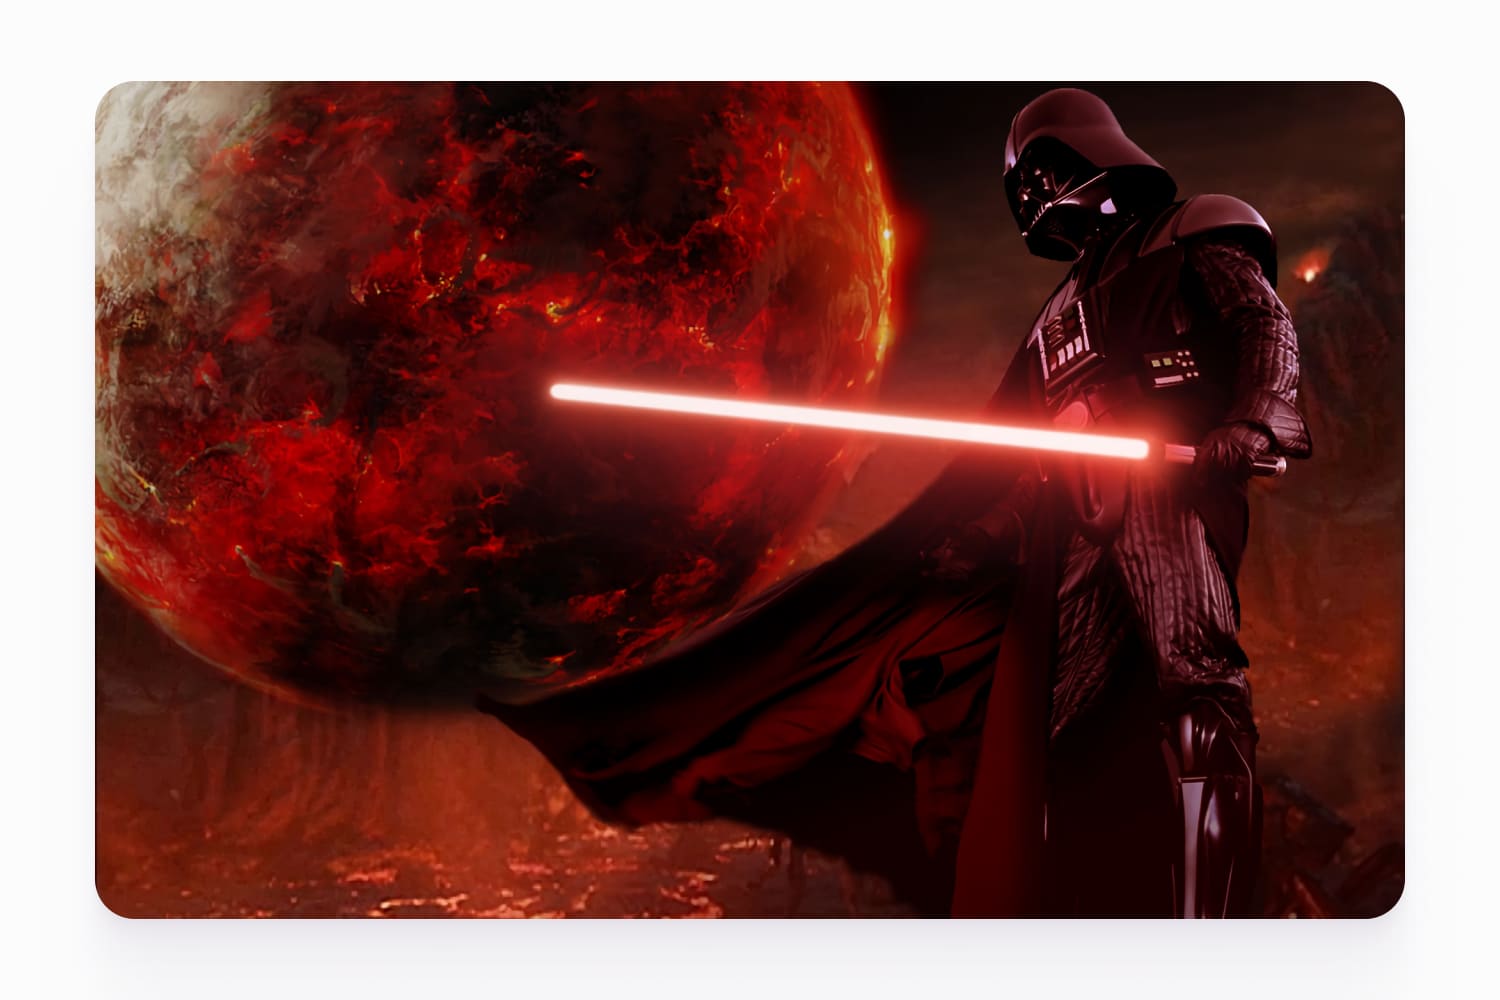 Image of Darth Vader with a lightsaber against the background of the red planet.